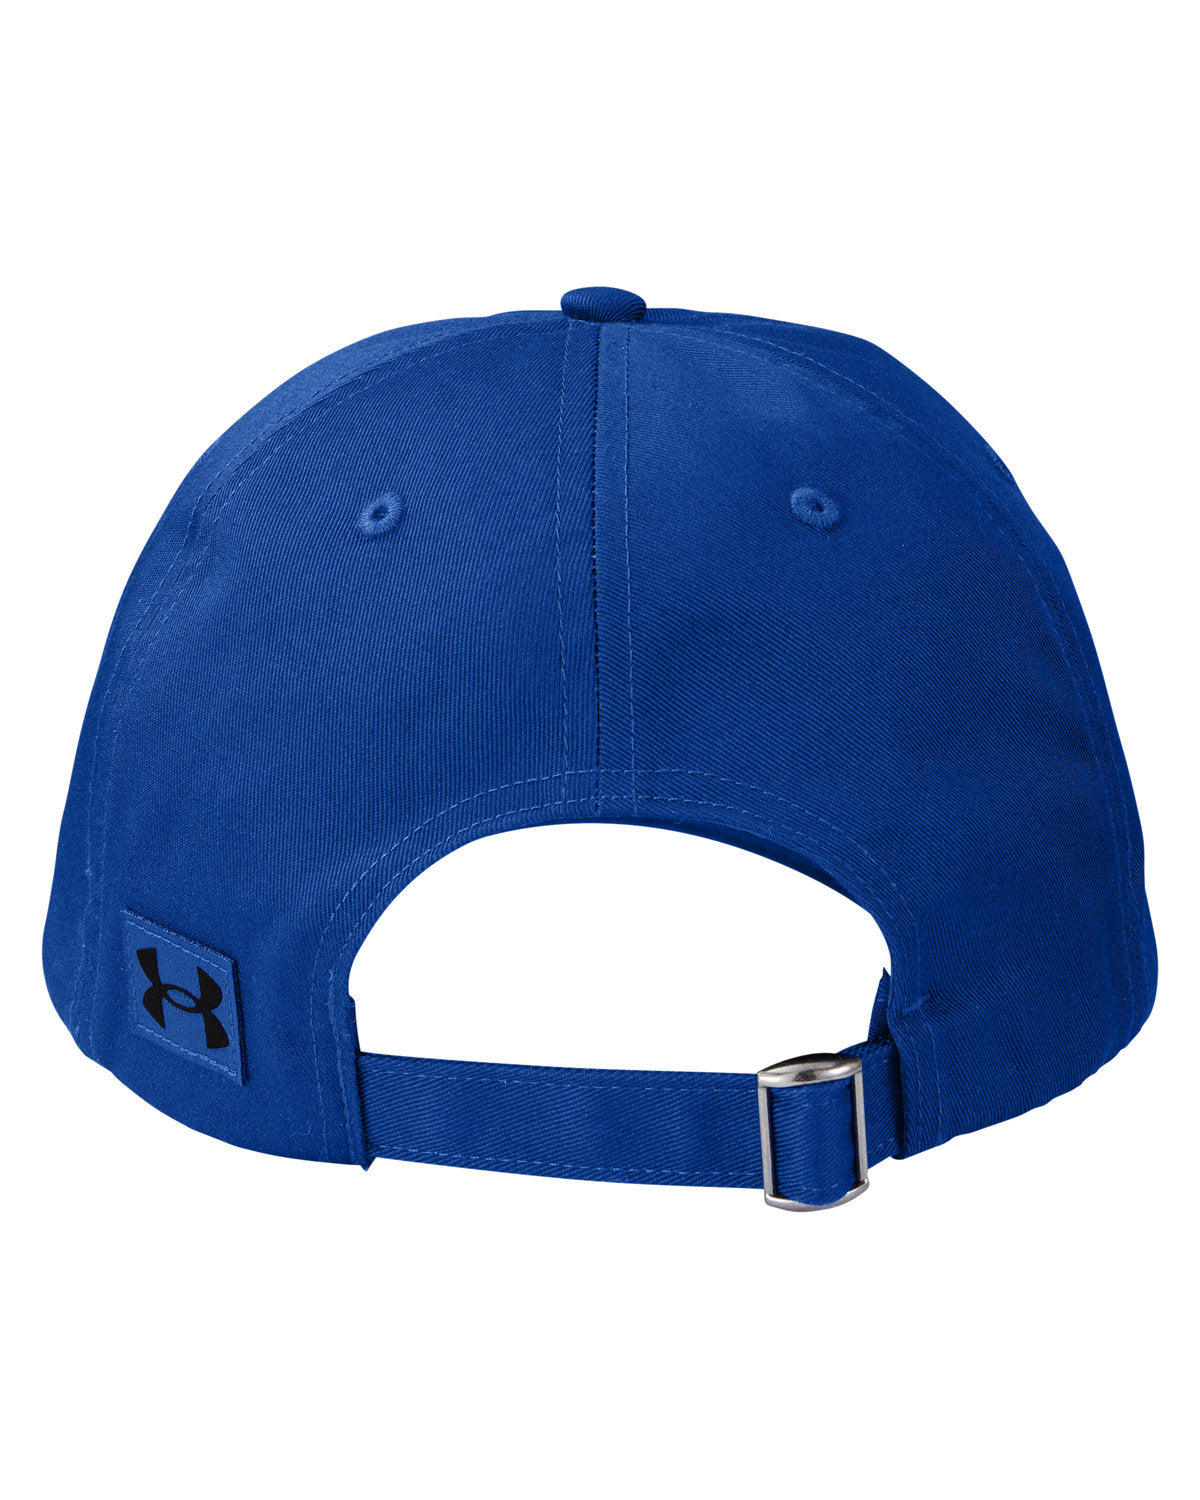 Under Armour Chino Customized Hats, Royal